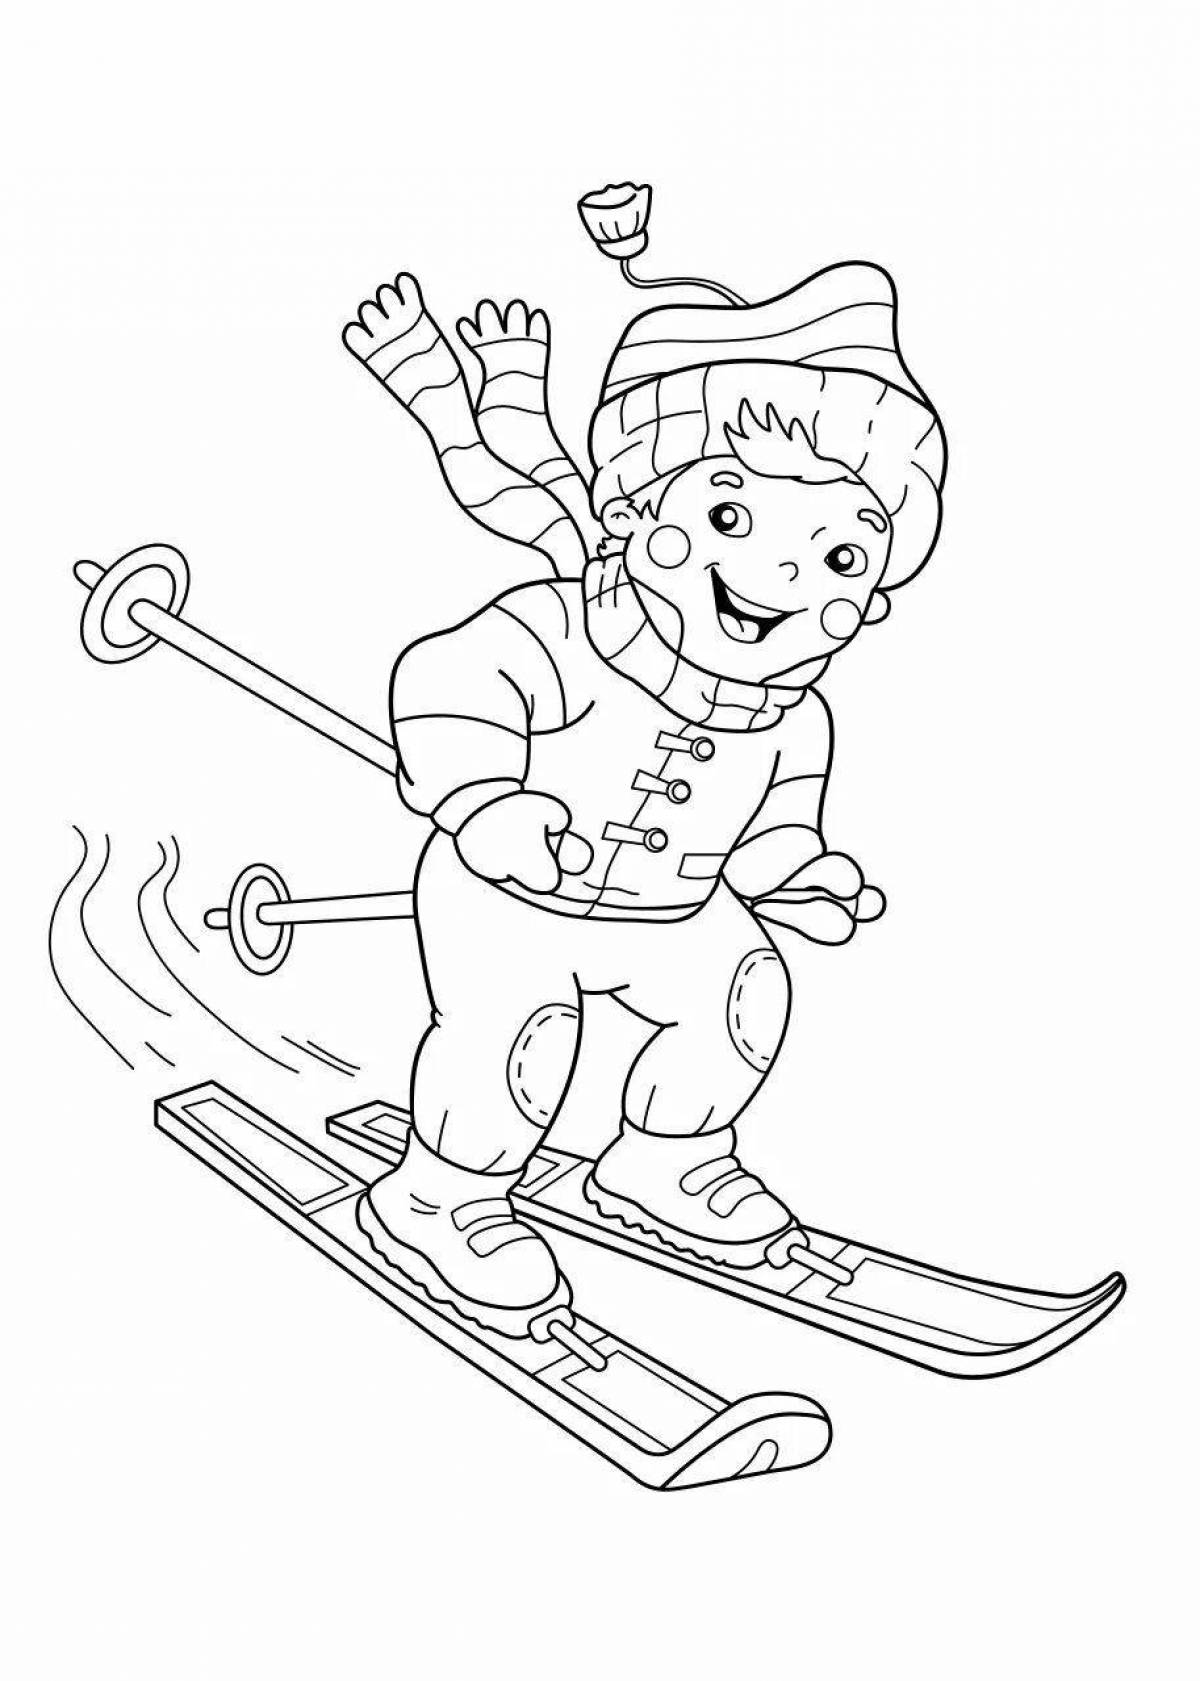 Exotic ski coloring page